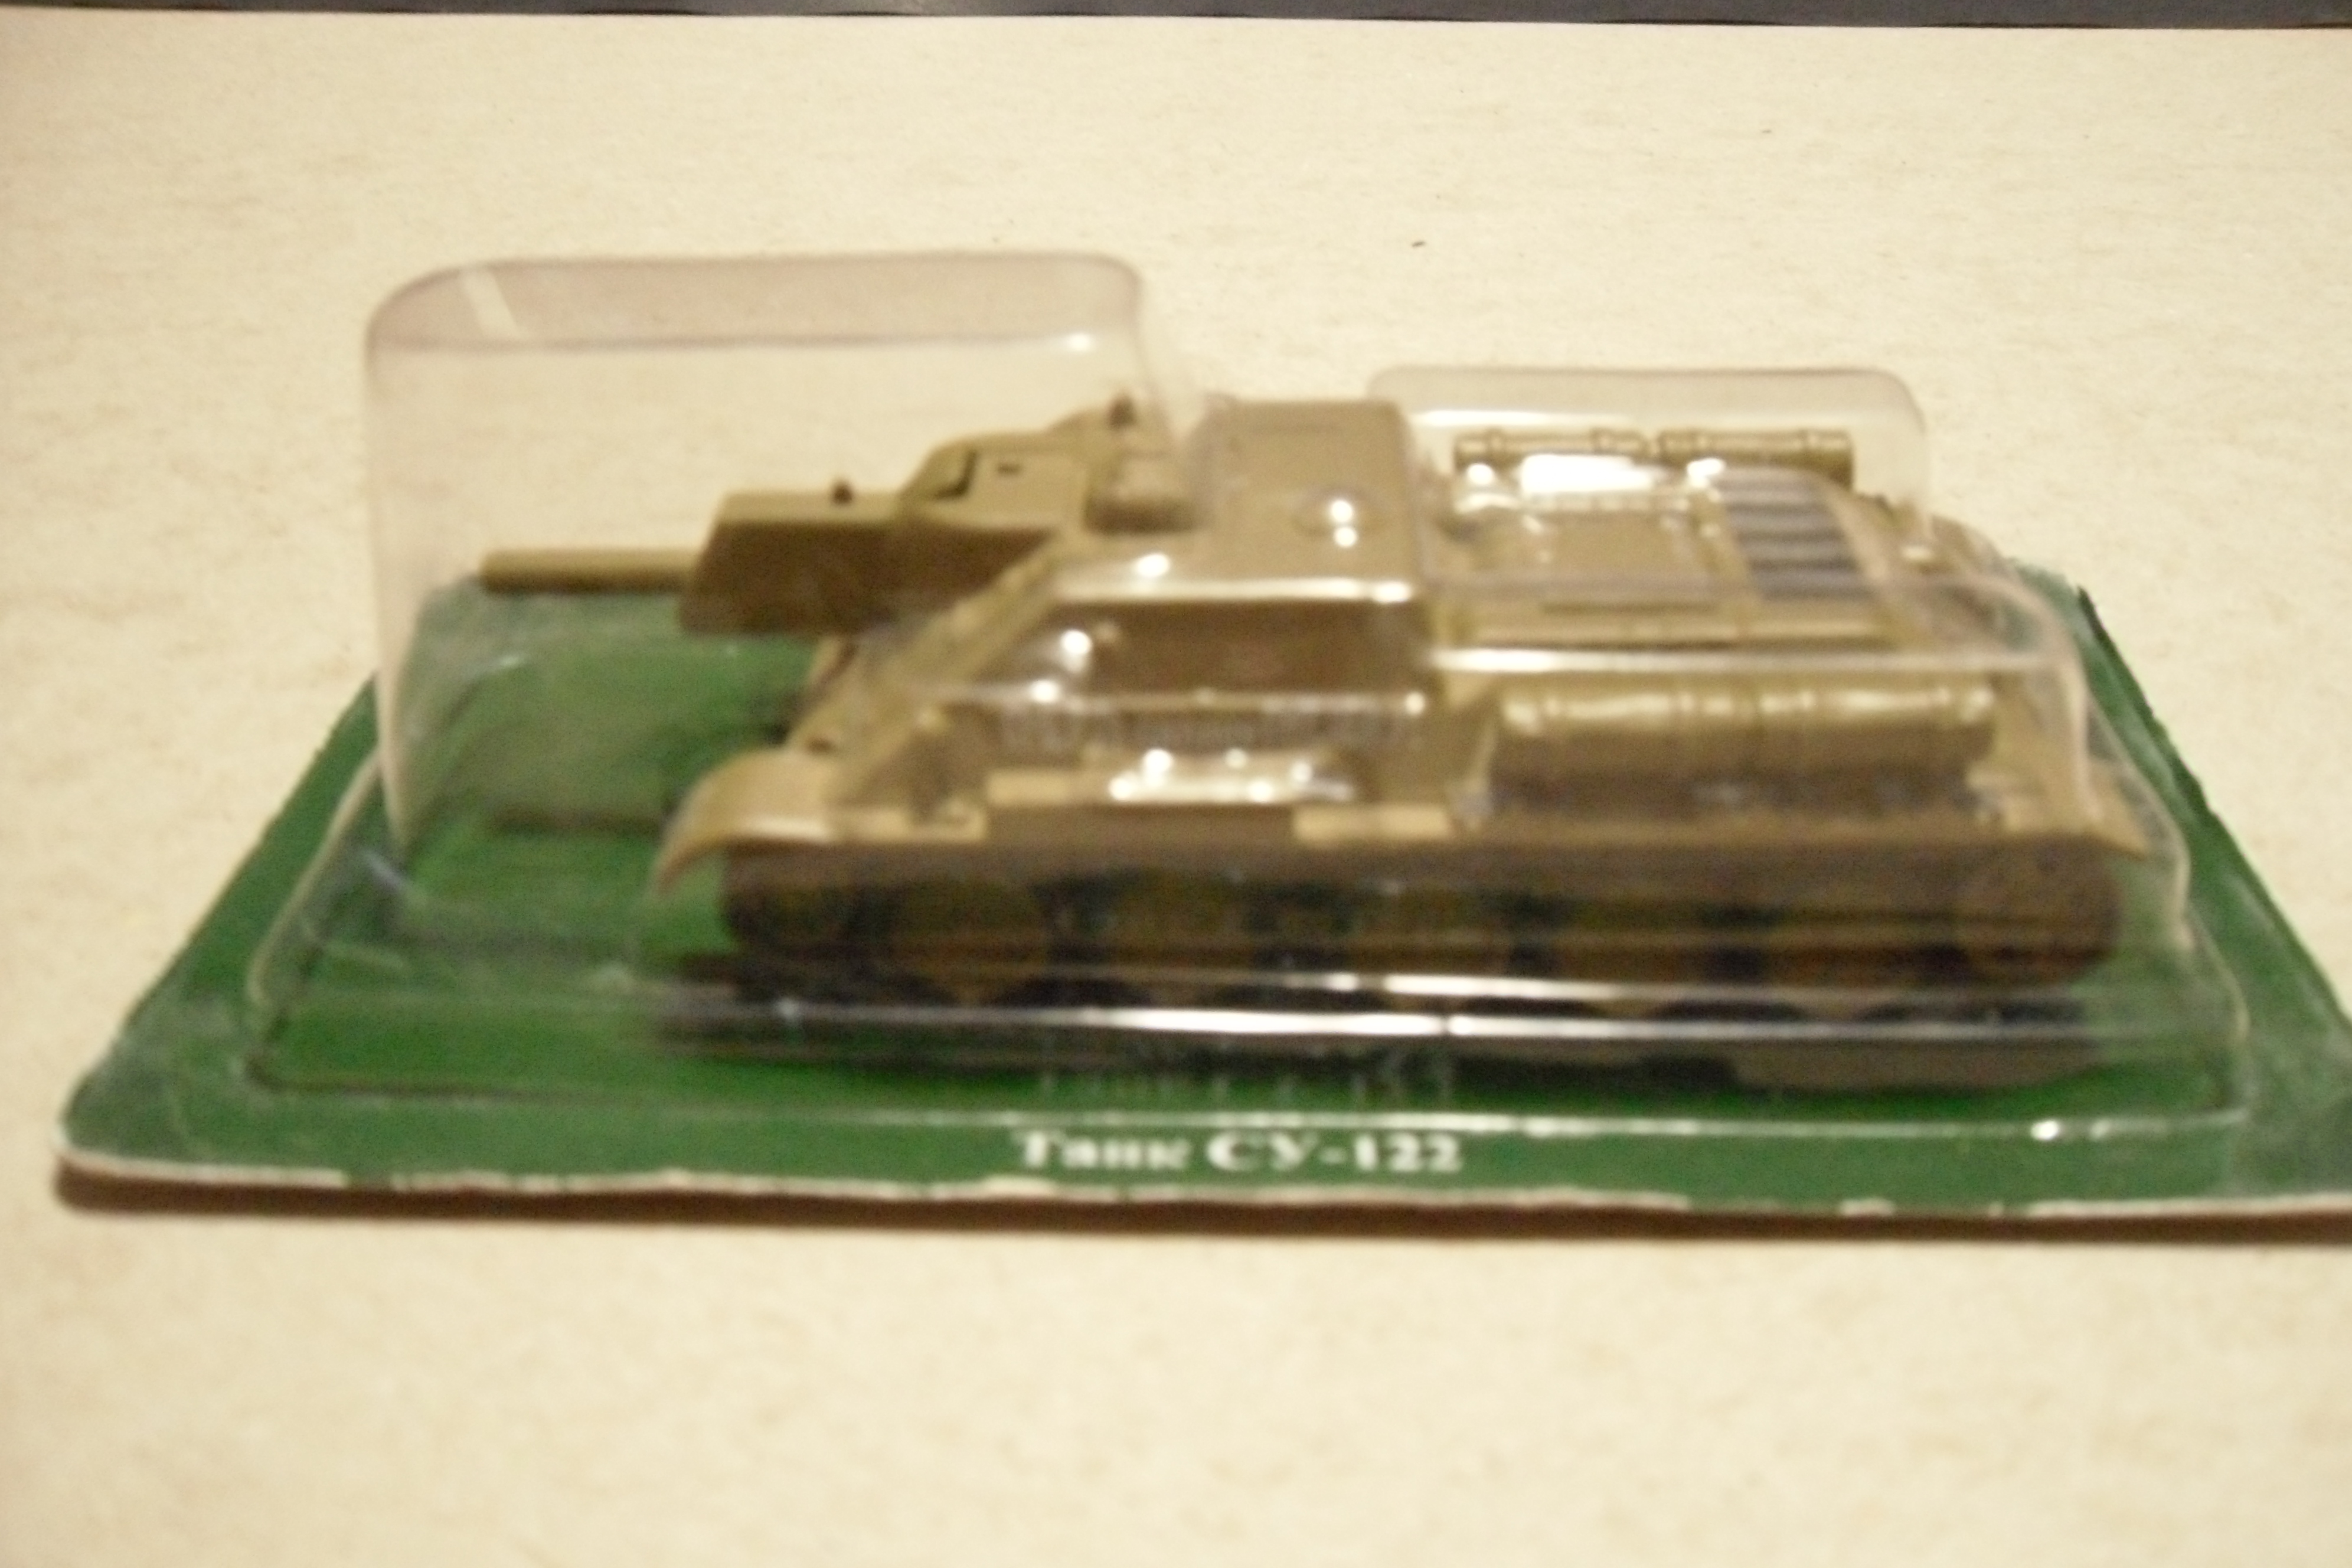 333 EAGLE MOSS TANK CY-122 172 SCALE - Click Image to Close